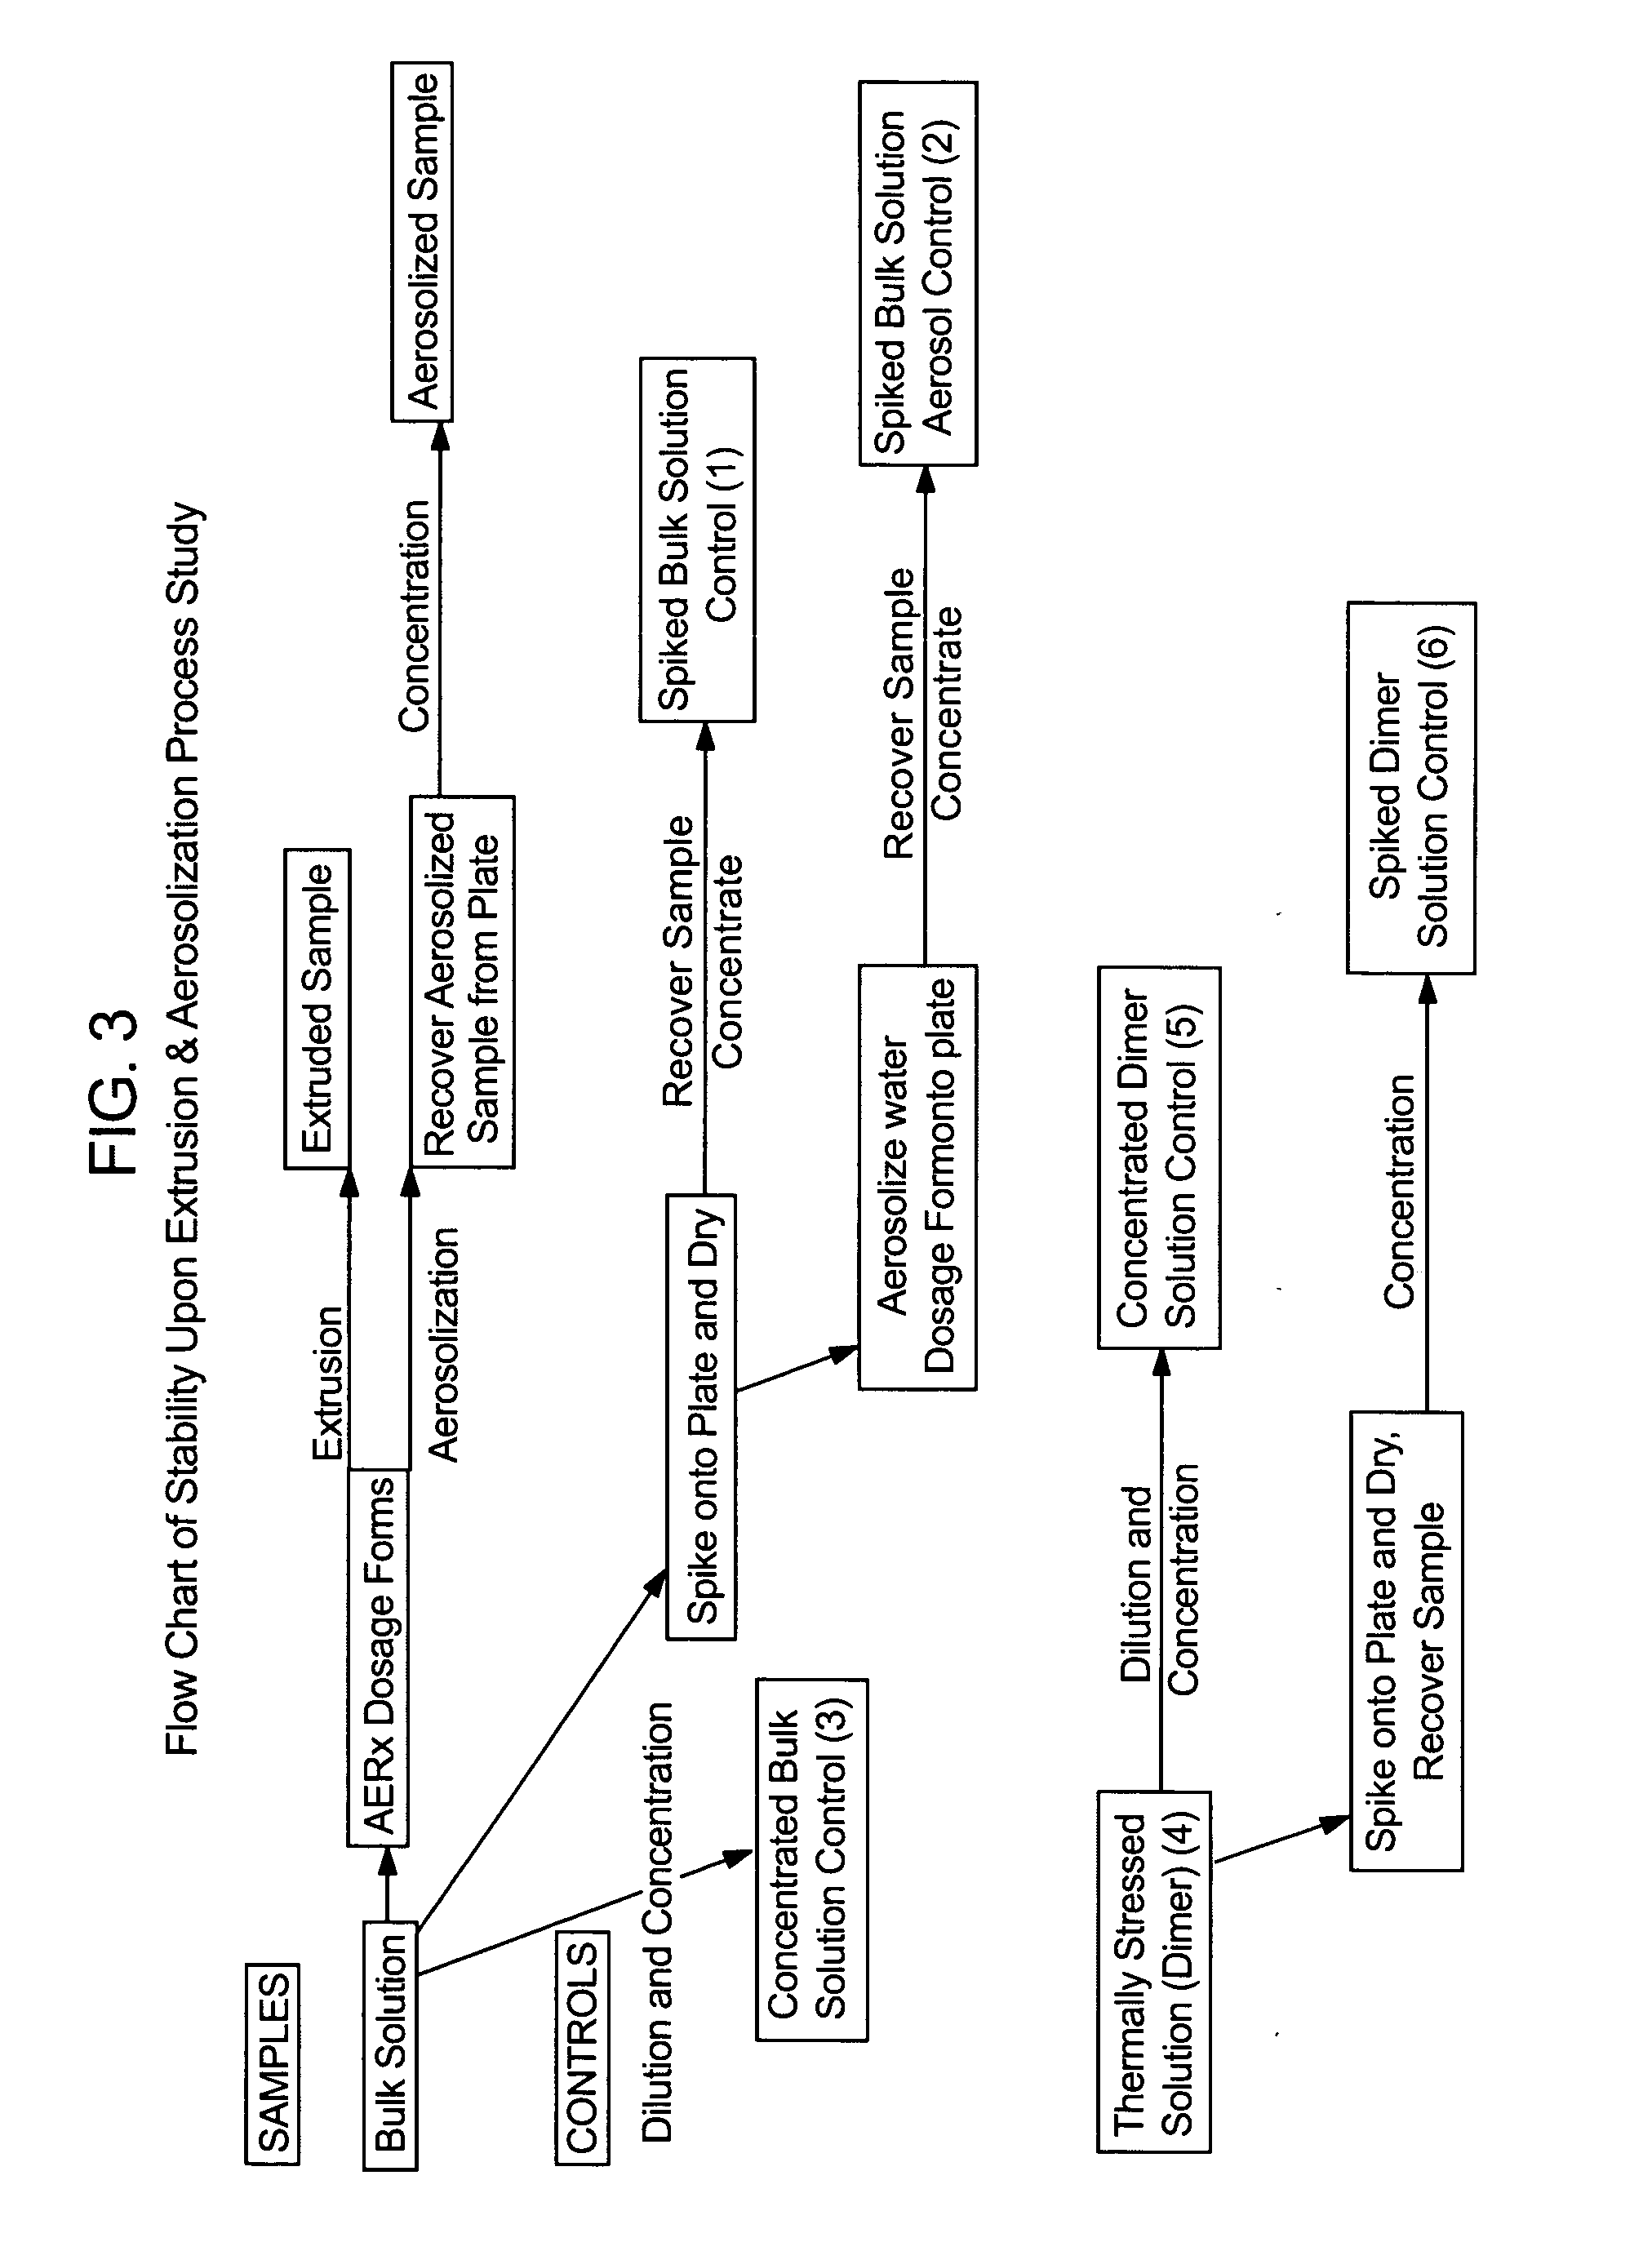 Compositions methods and systems for pulmonary delivery of recombinant human interferon alpha-2b